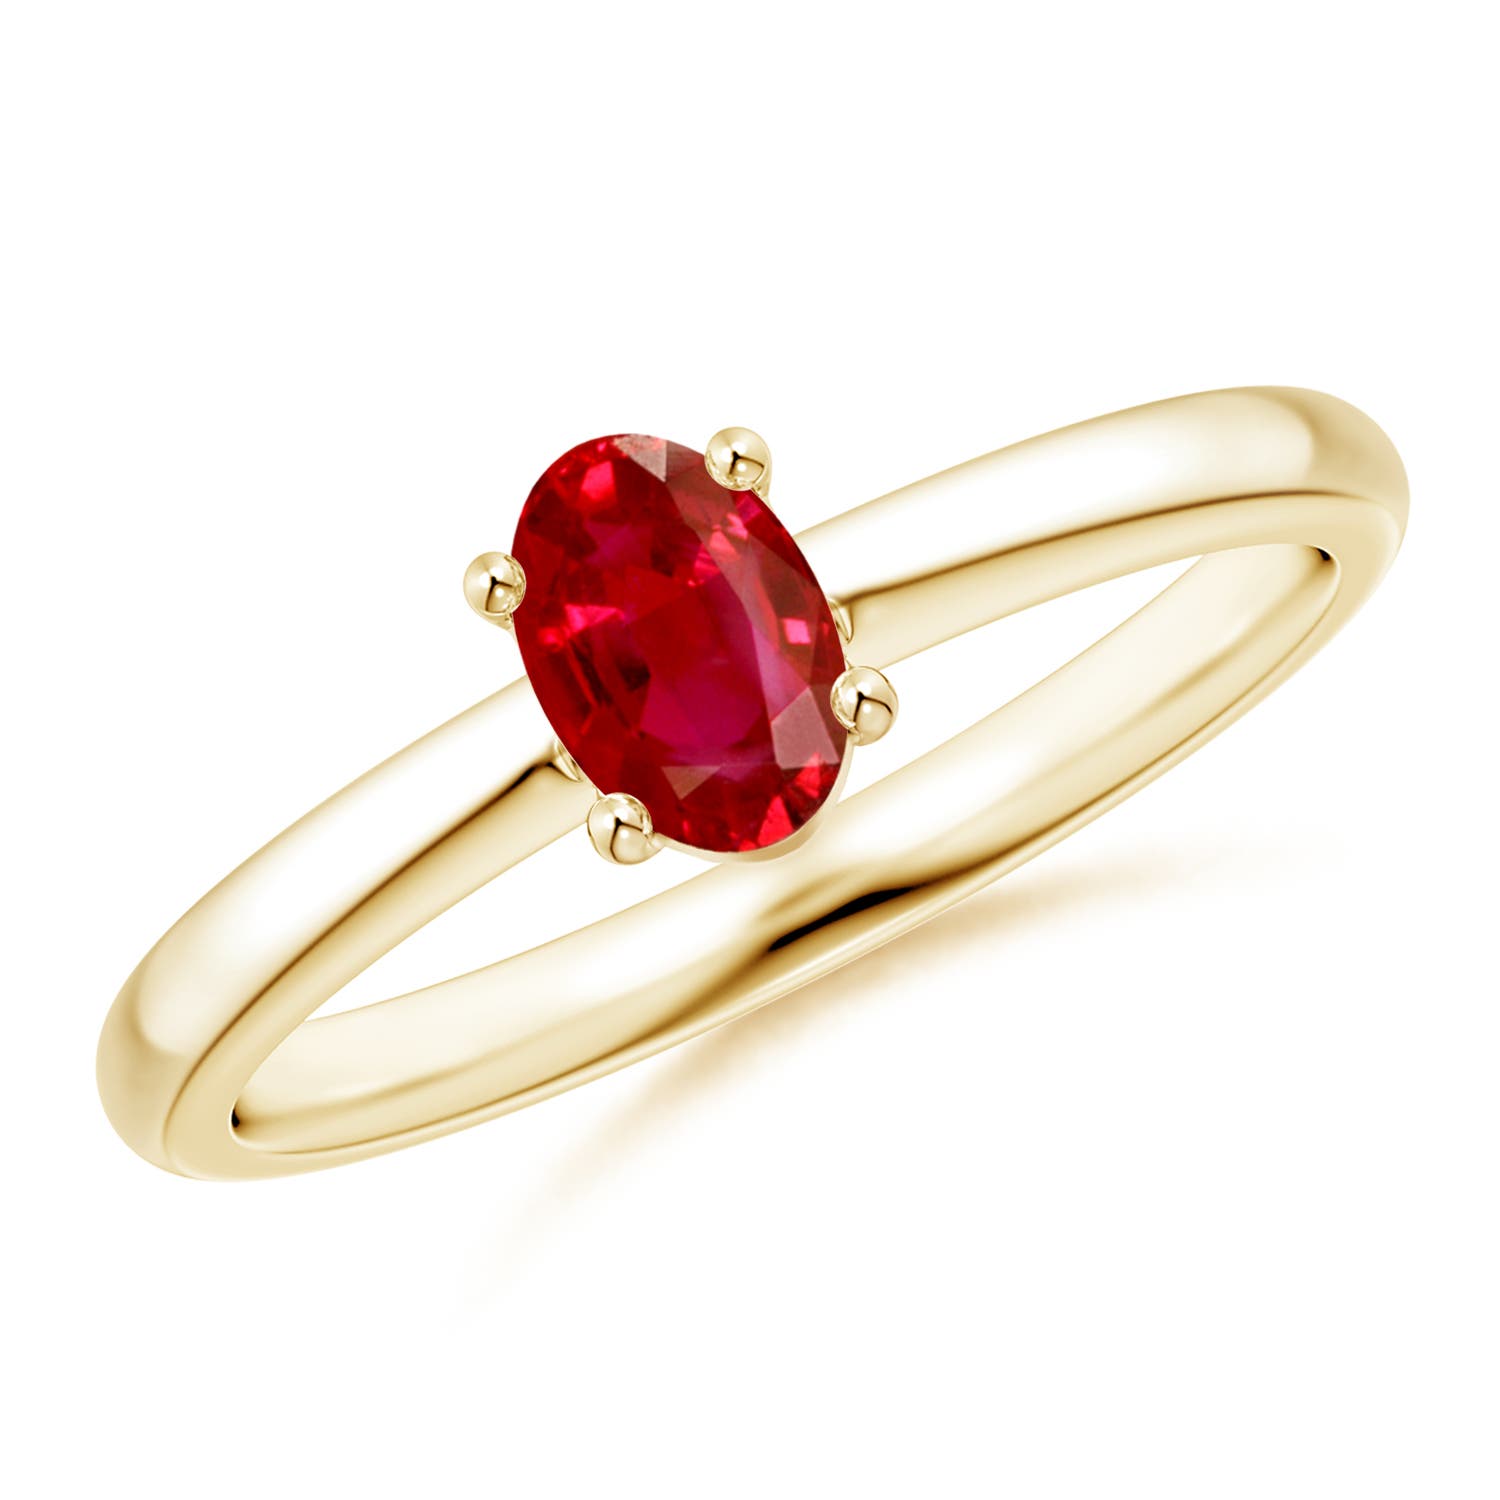 AAA - Ruby / 0.6 CT / 14 KT Yellow Gold